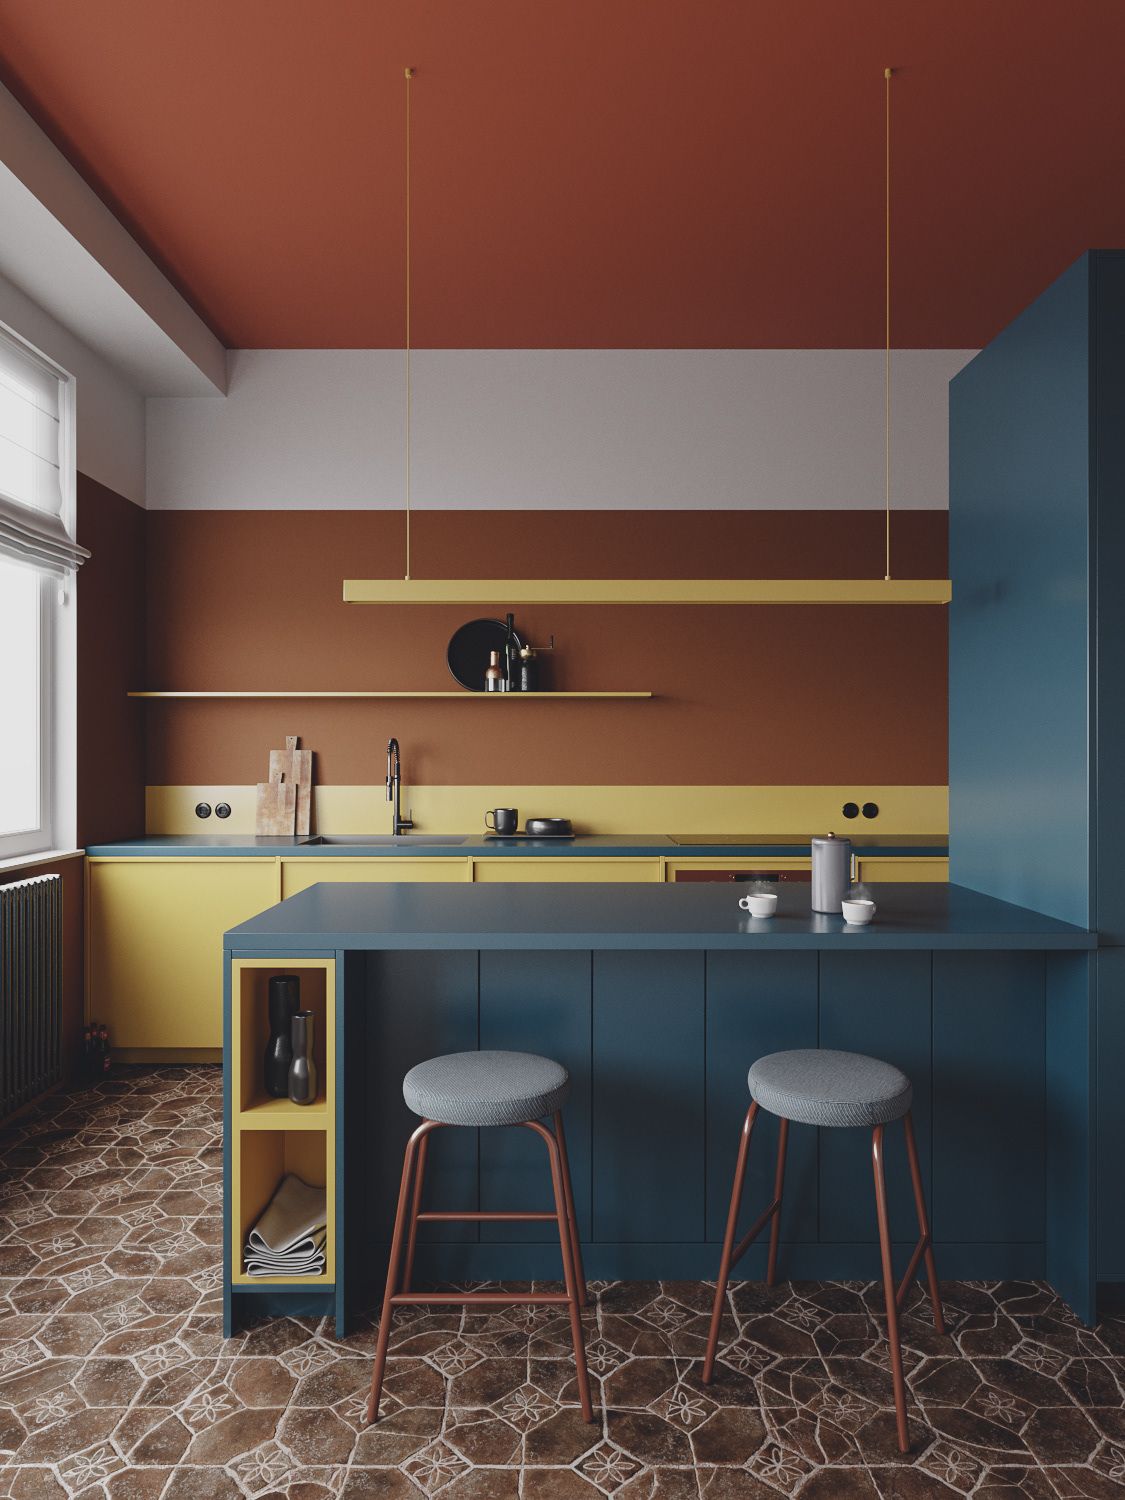 Colorful Kitchen Island for A Cheerful Impression